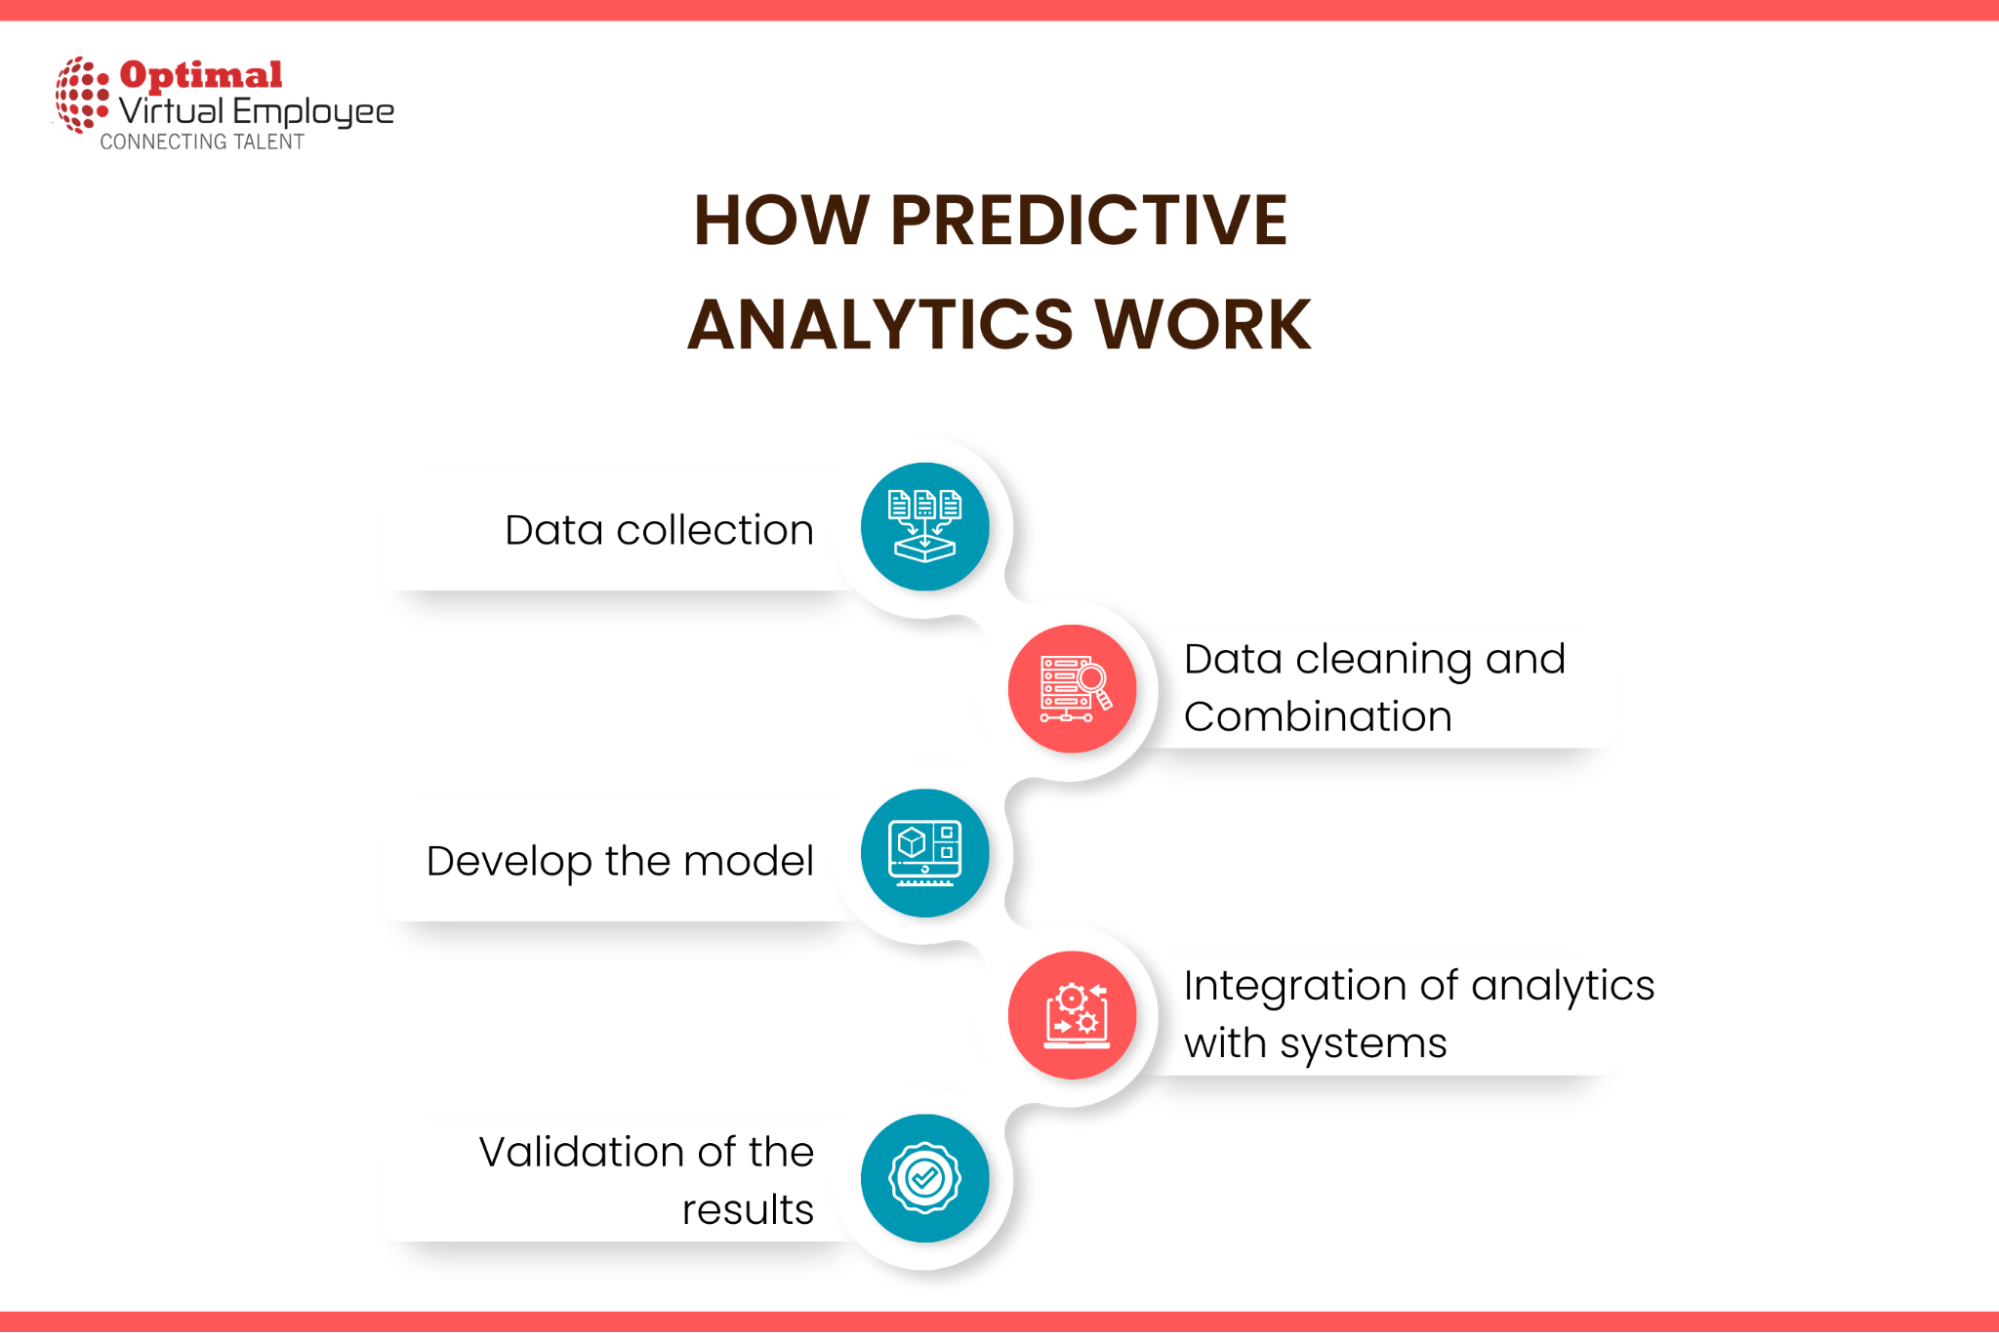 What are Predictive Analytics and Decision Making